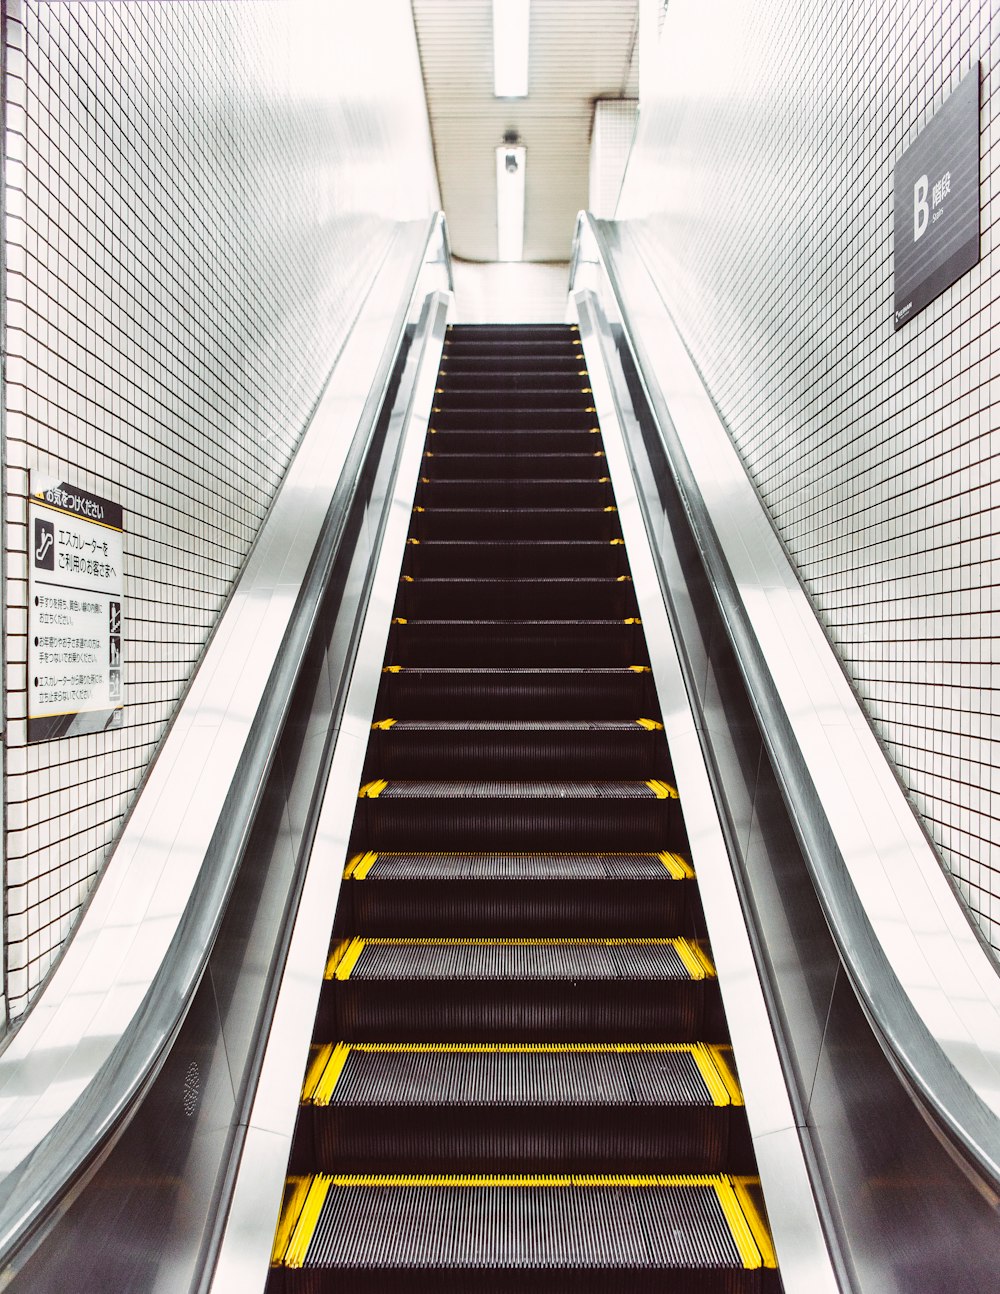 black and white escalator with no people